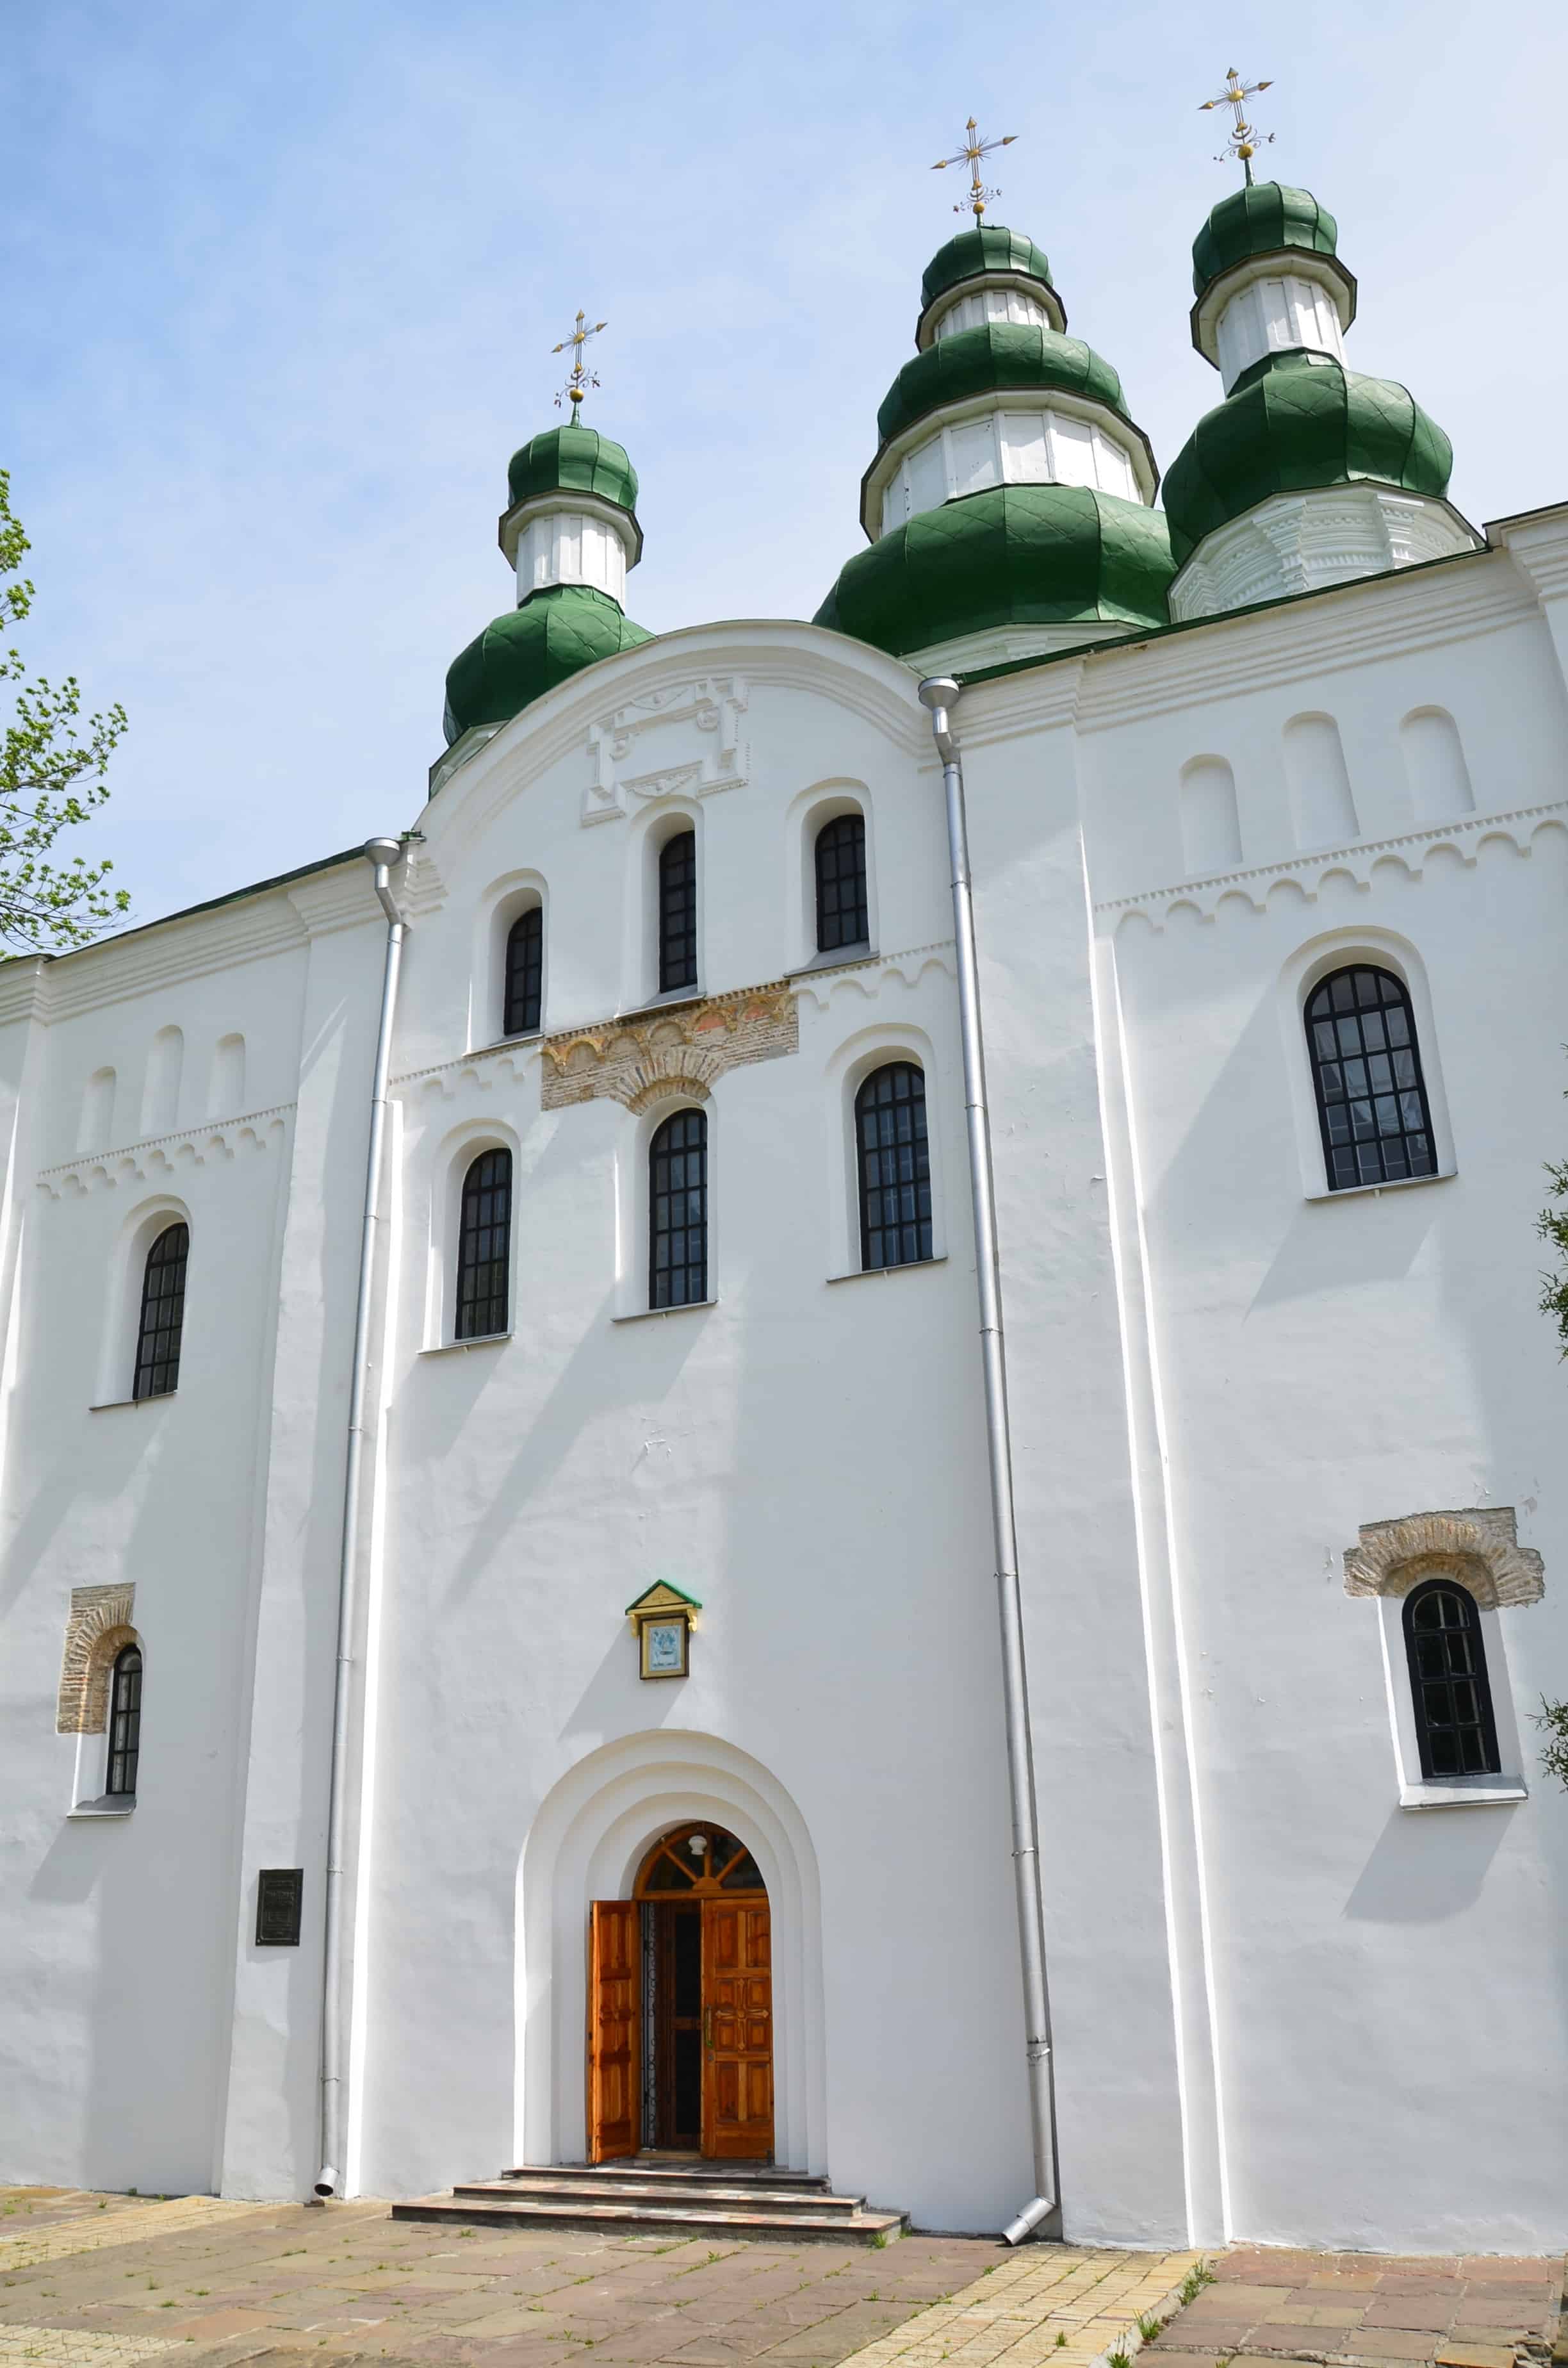 Assumption Cathedral at Eletsky Monastery in Chernihiv, Ukraine